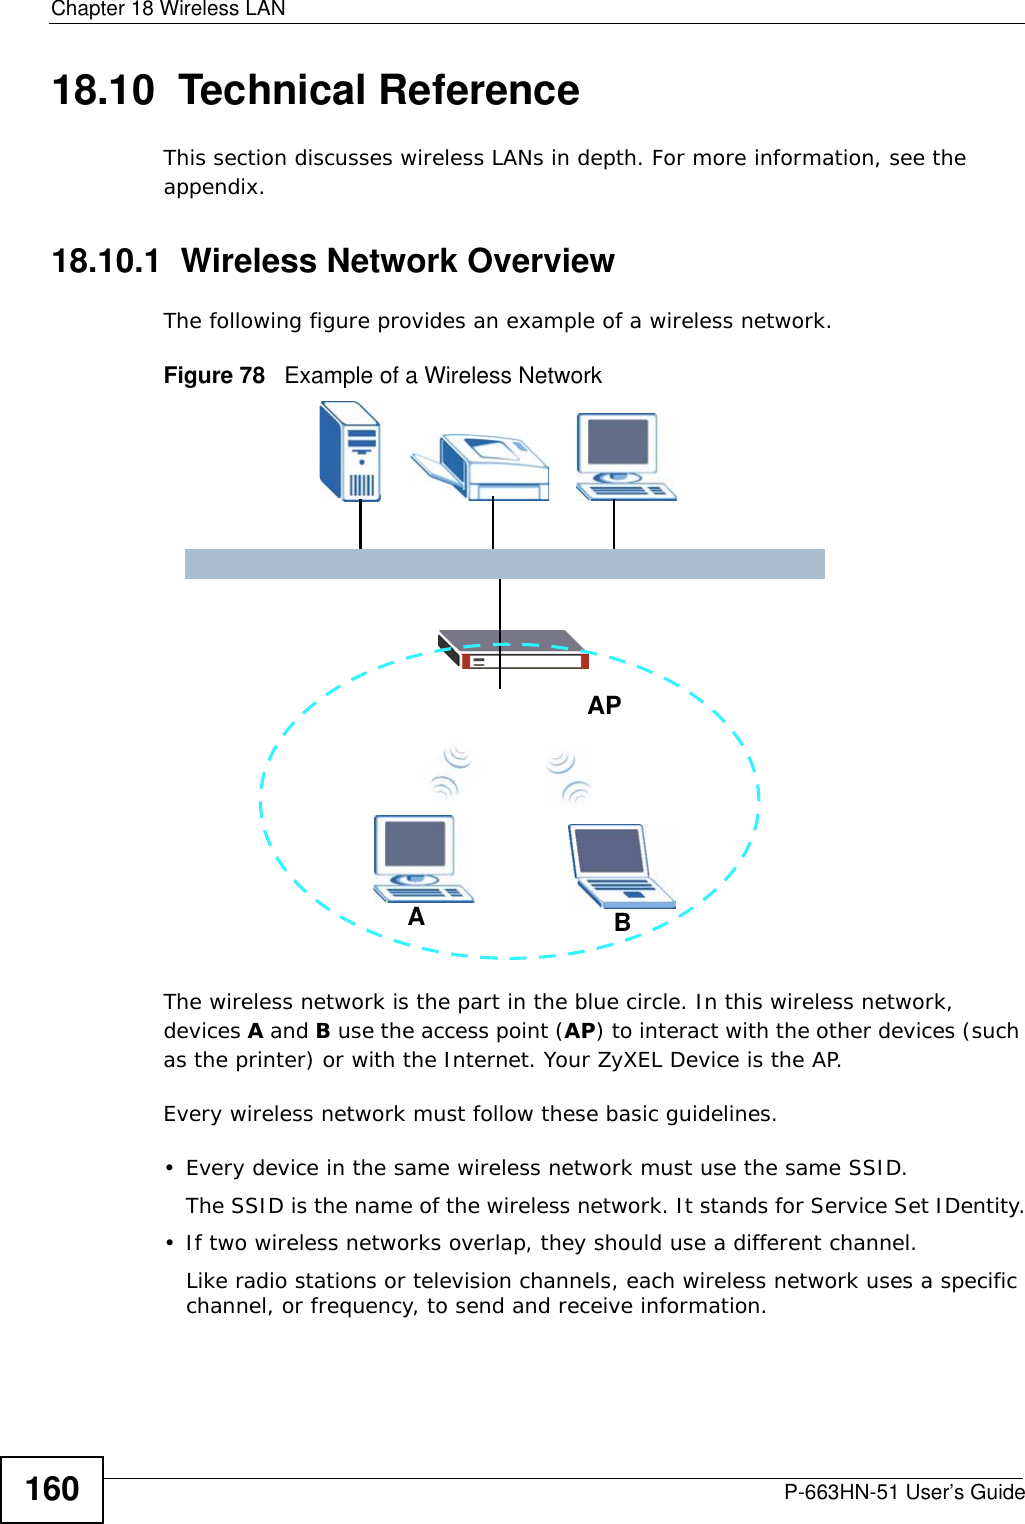 Chapter 18 Wireless LANP-663HN-51 User’s Guide16018.10  Technical ReferenceThis section discusses wireless LANs in depth. For more information, see the appendix.18.10.1  Wireless Network OverviewThe following figure provides an example of a wireless network.Figure 78   Example of a Wireless NetworkThe wireless network is the part in the blue circle. In this wireless network, devices A and B use the access point (AP) to interact with the other devices (such as the printer) or with the Internet. Your ZyXEL Device is the AP.Every wireless network must follow these basic guidelines.• Every device in the same wireless network must use the same SSID.The SSID is the name of the wireless network. It stands for Service Set IDentity.• If two wireless networks overlap, they should use a different channel.Like radio stations or television channels, each wireless network uses a specific channel, or frequency, to send and receive information.ABAP